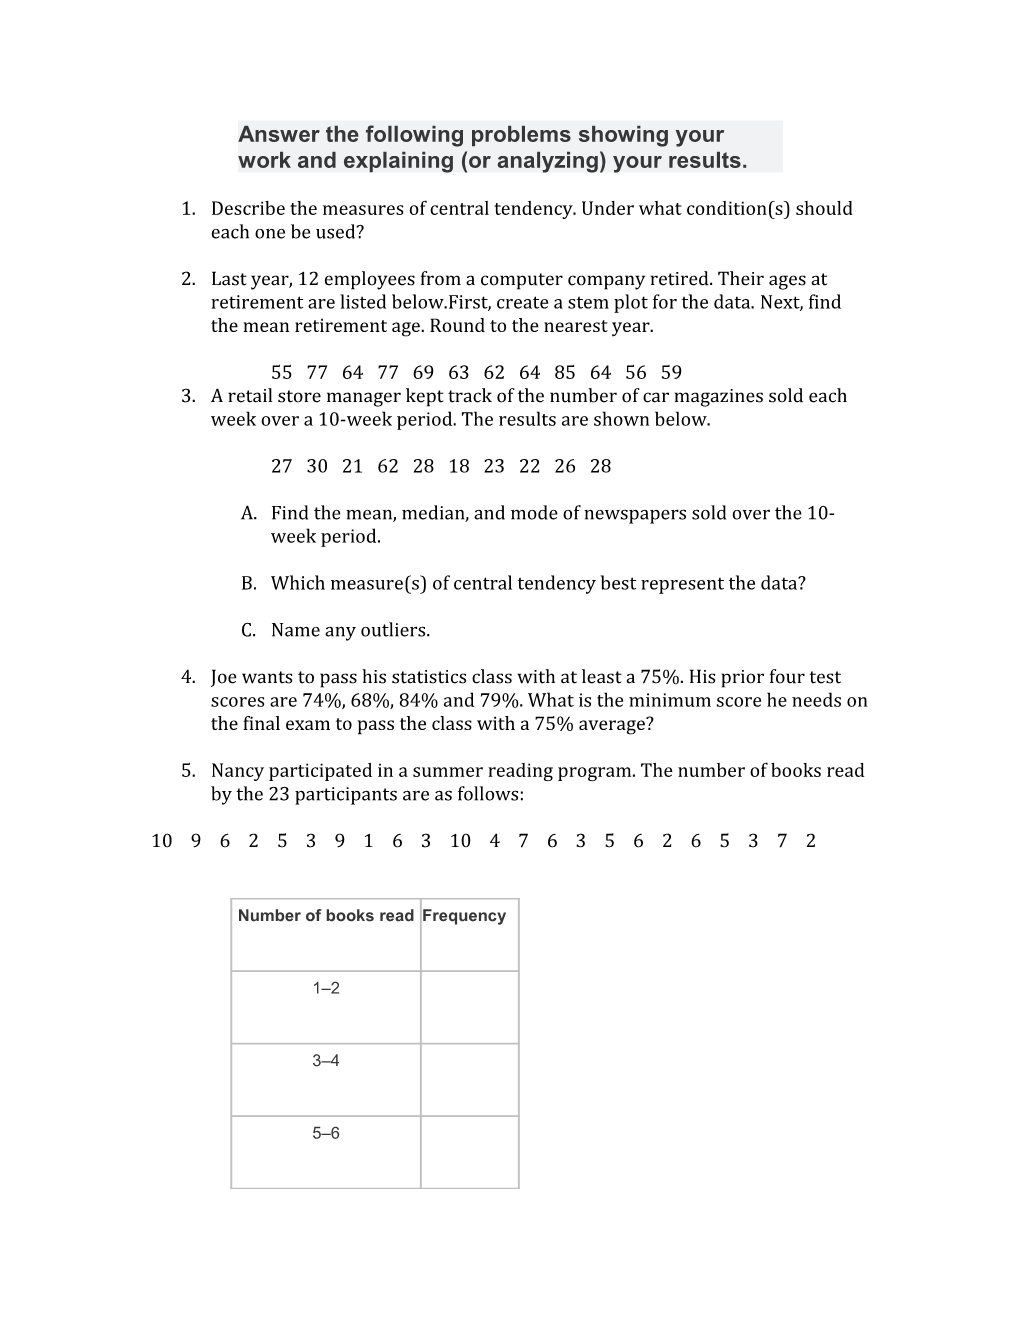 Answer the Following Problems Showing Your Work and Explaining (Or Analyzing) Your Results